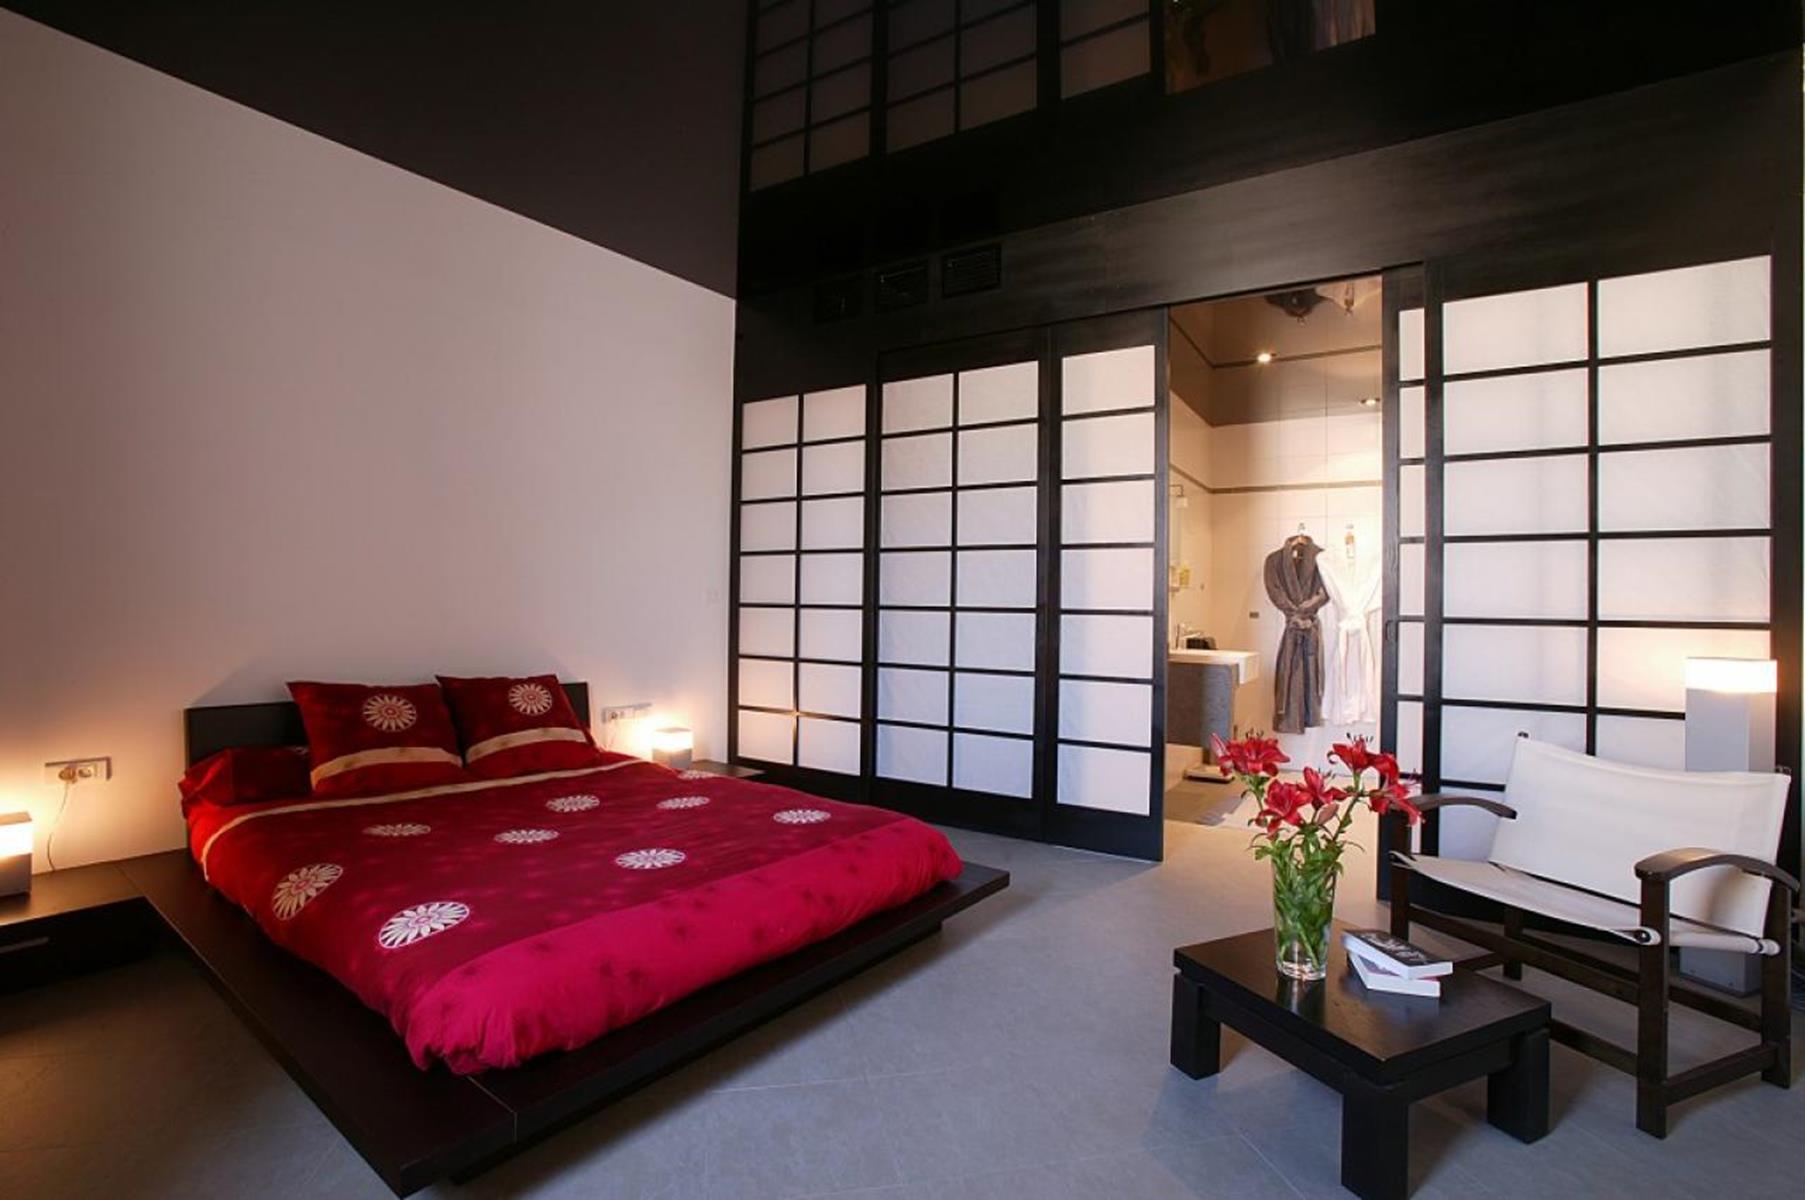 Japanese-style bedroom photo options